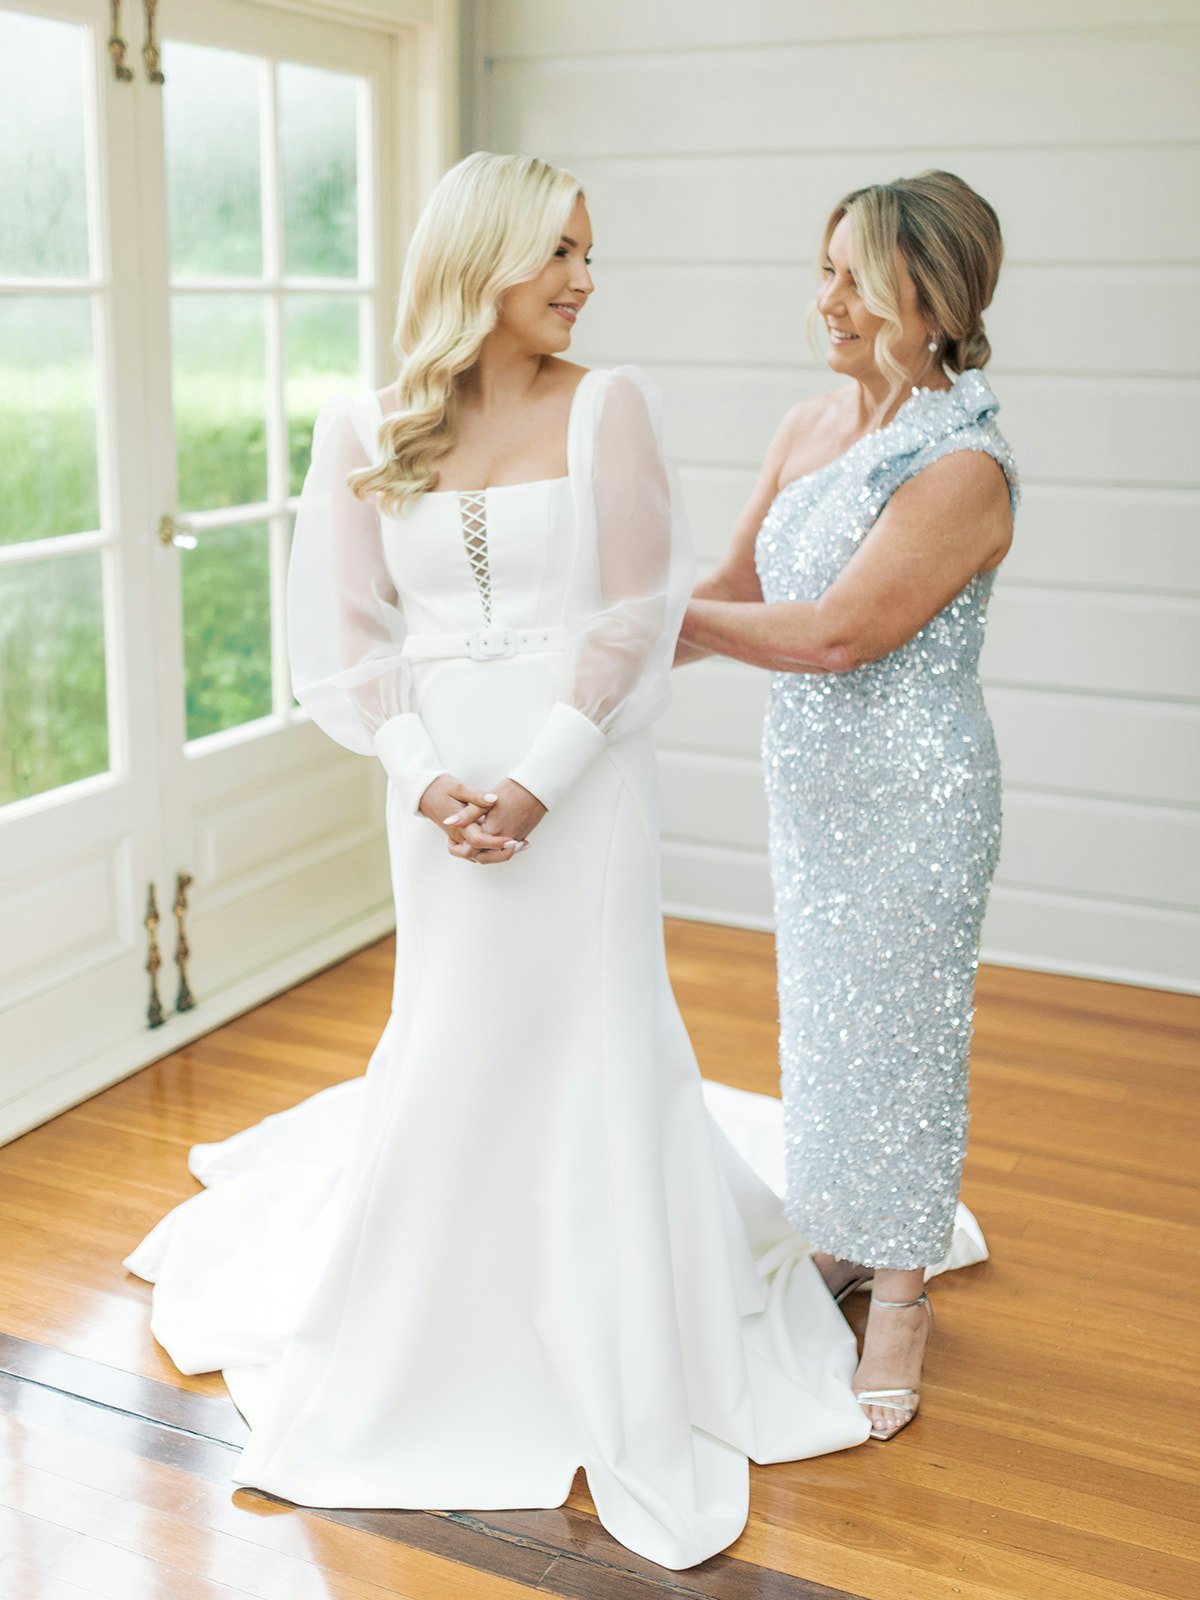 Bride and mother of the bride